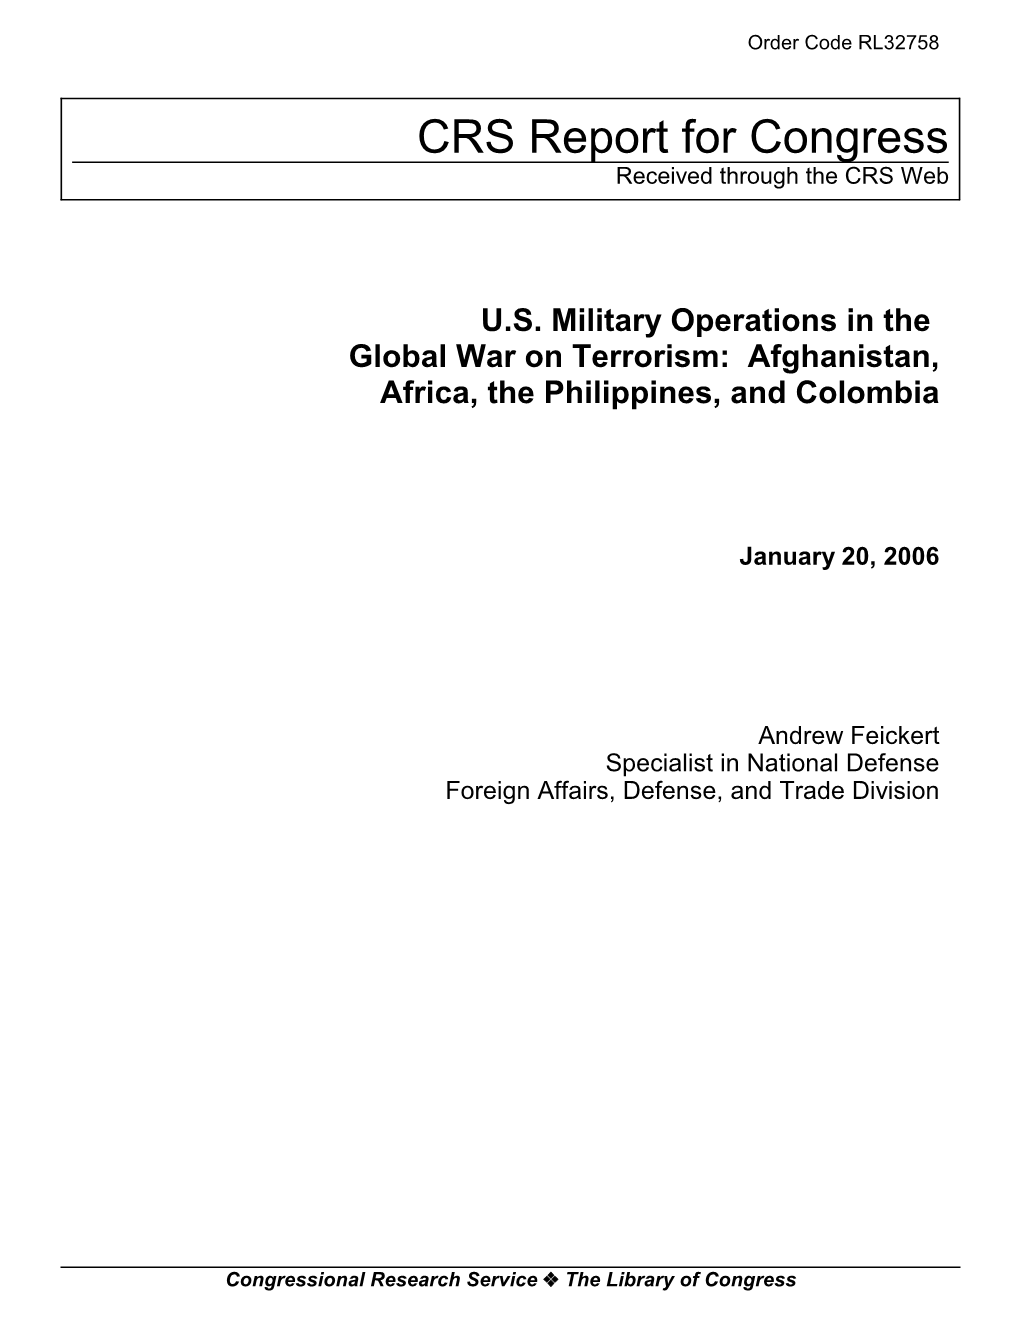 U.S. Military Operations in the Global War on Terrorism: Afghanistan, Africa, the Philippines, and Colombia